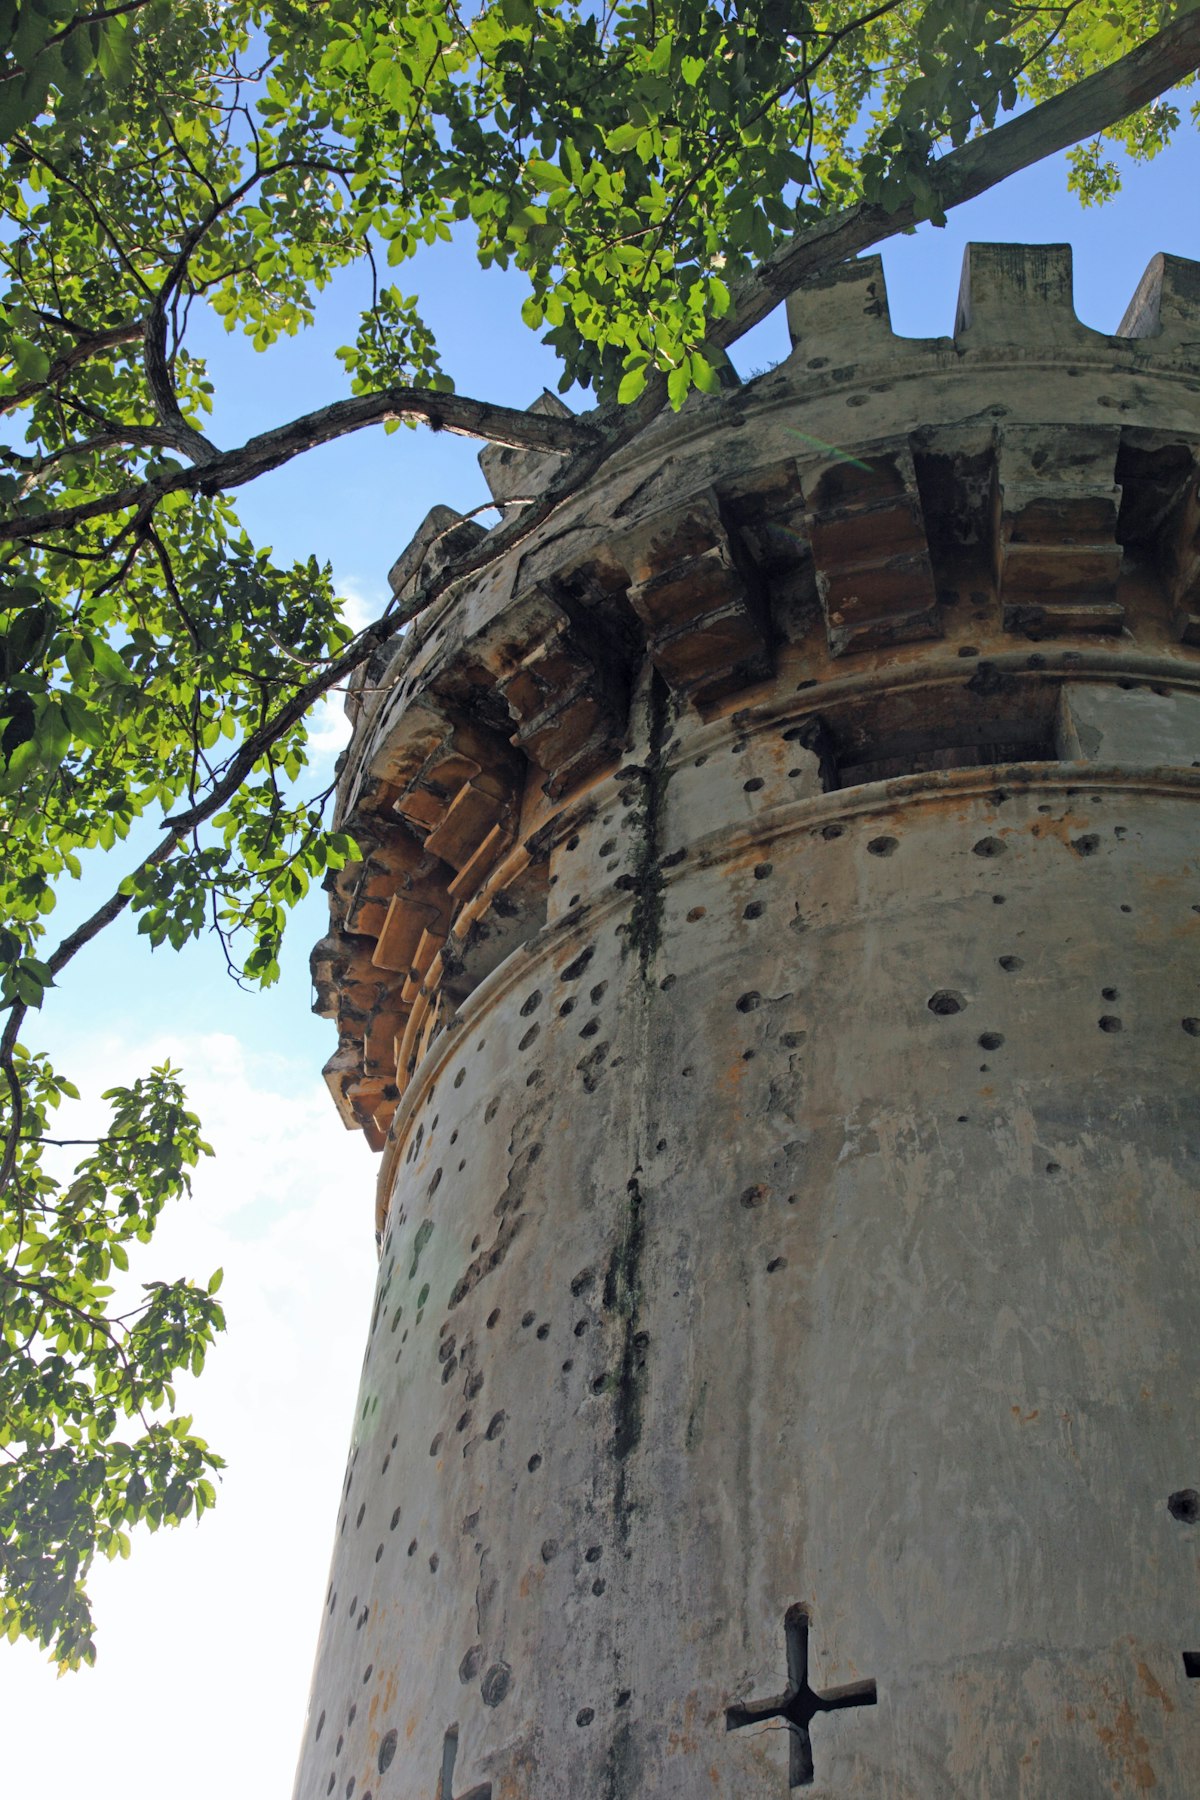 Spanish colonial era tower with battlements and multiple bullet holes, National Museum of Costa Rica.